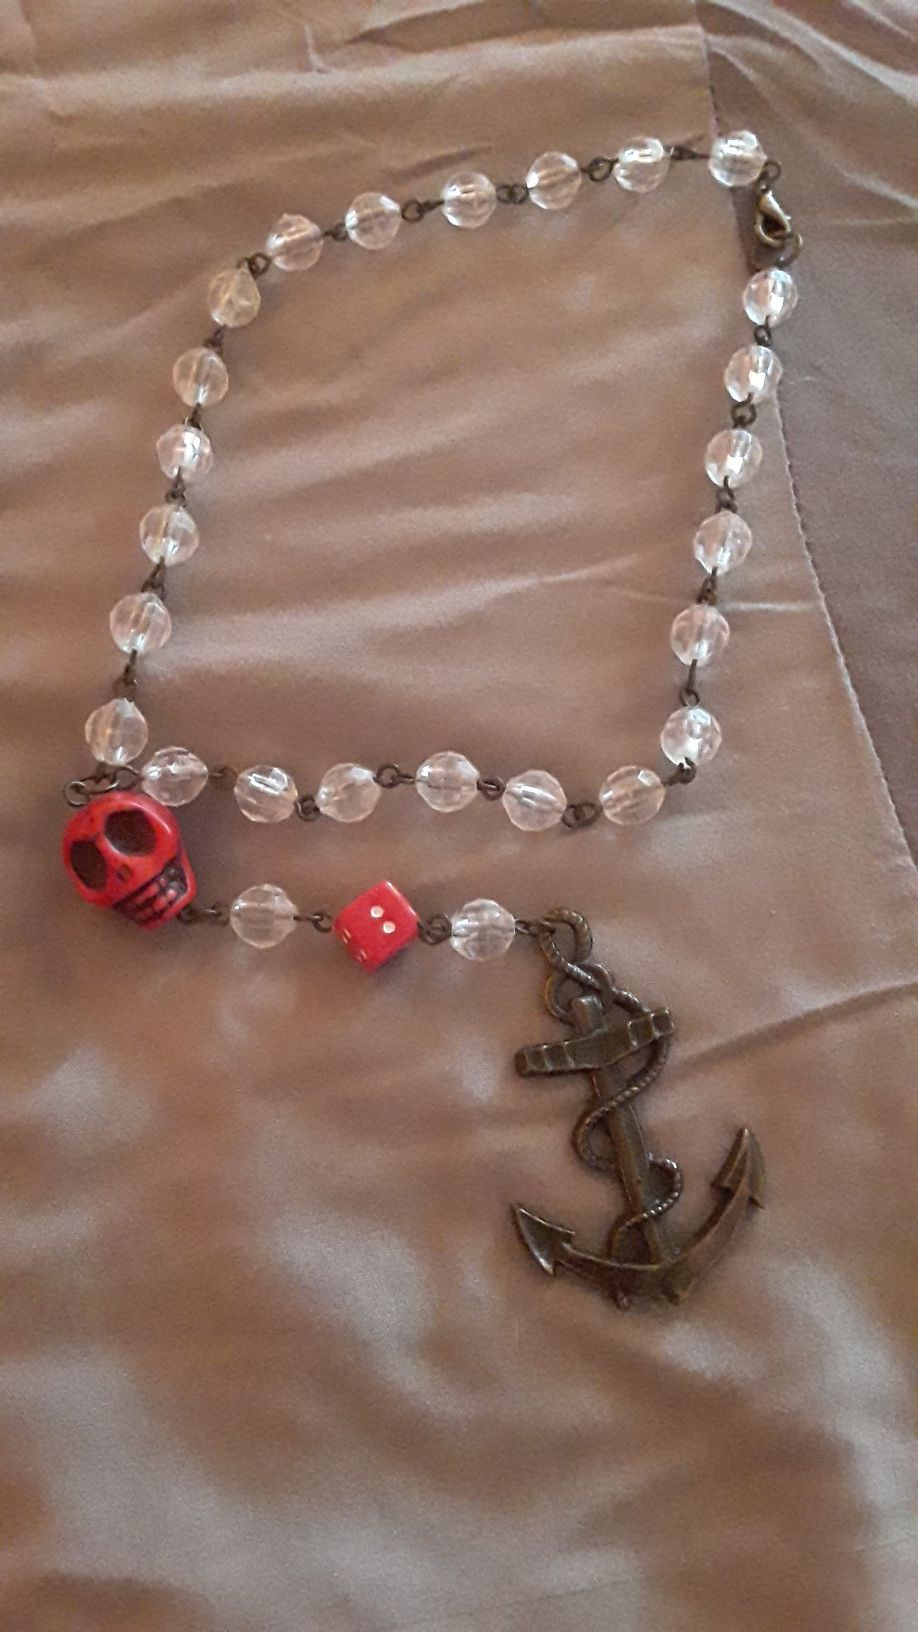 $5 Necklace - Skull/Dice/Anchor beaded necklace "choker style"